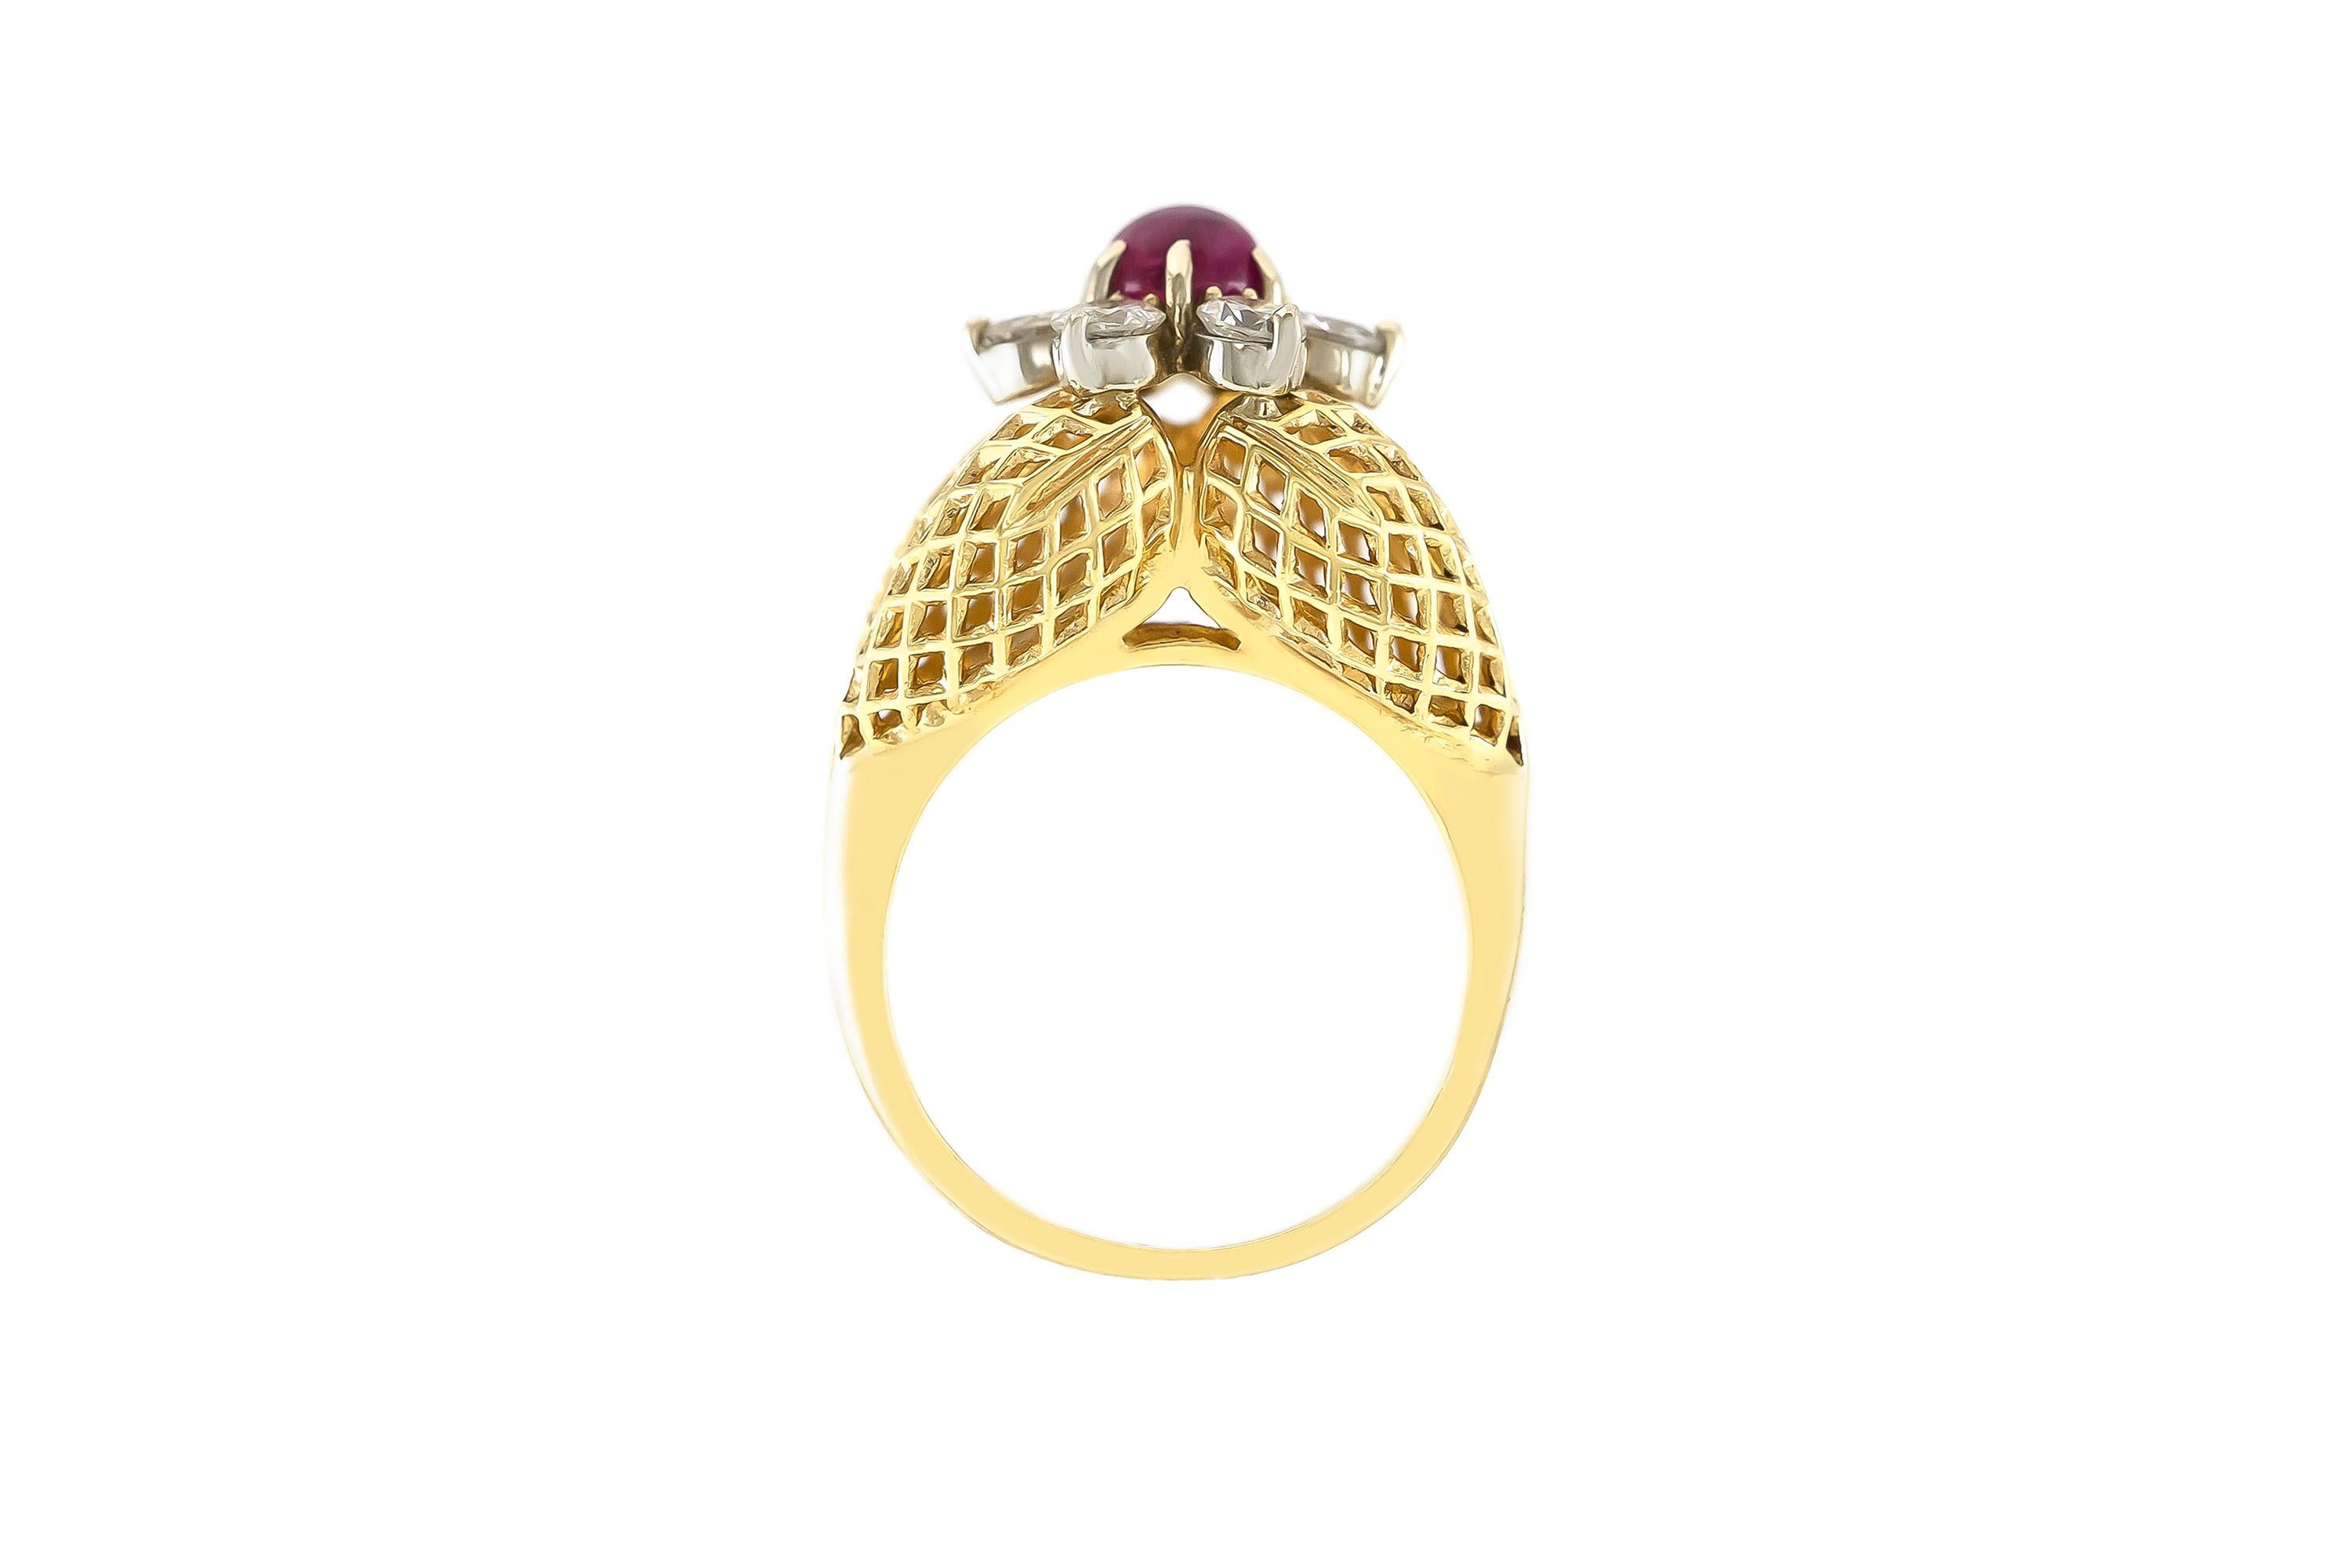 The ring is finely crafted in 14 yellow gold with center ruby weighing approximately total of 0.50 carat and diamonds around weighing approximately total of 0.60 carat.
Circa 1970.